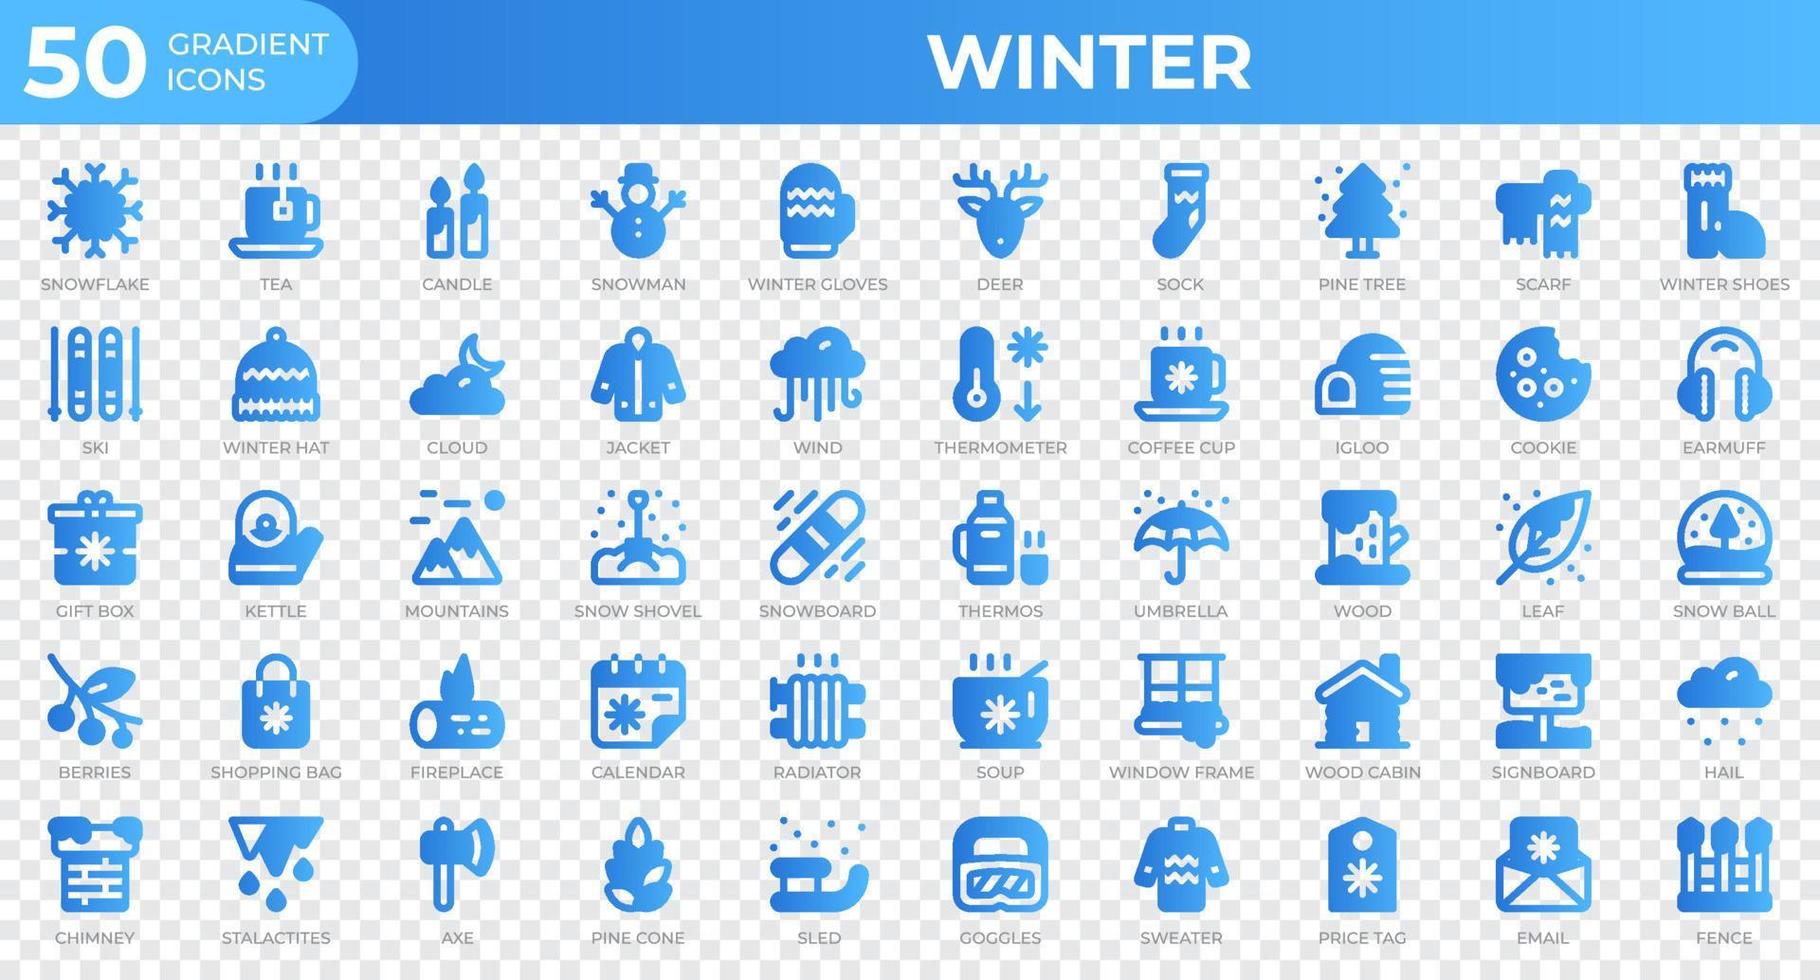 Winter icons in gradient style. Snowflake, tea, sweater. Gradient icons collection. Holiday symbol. Vector illustration